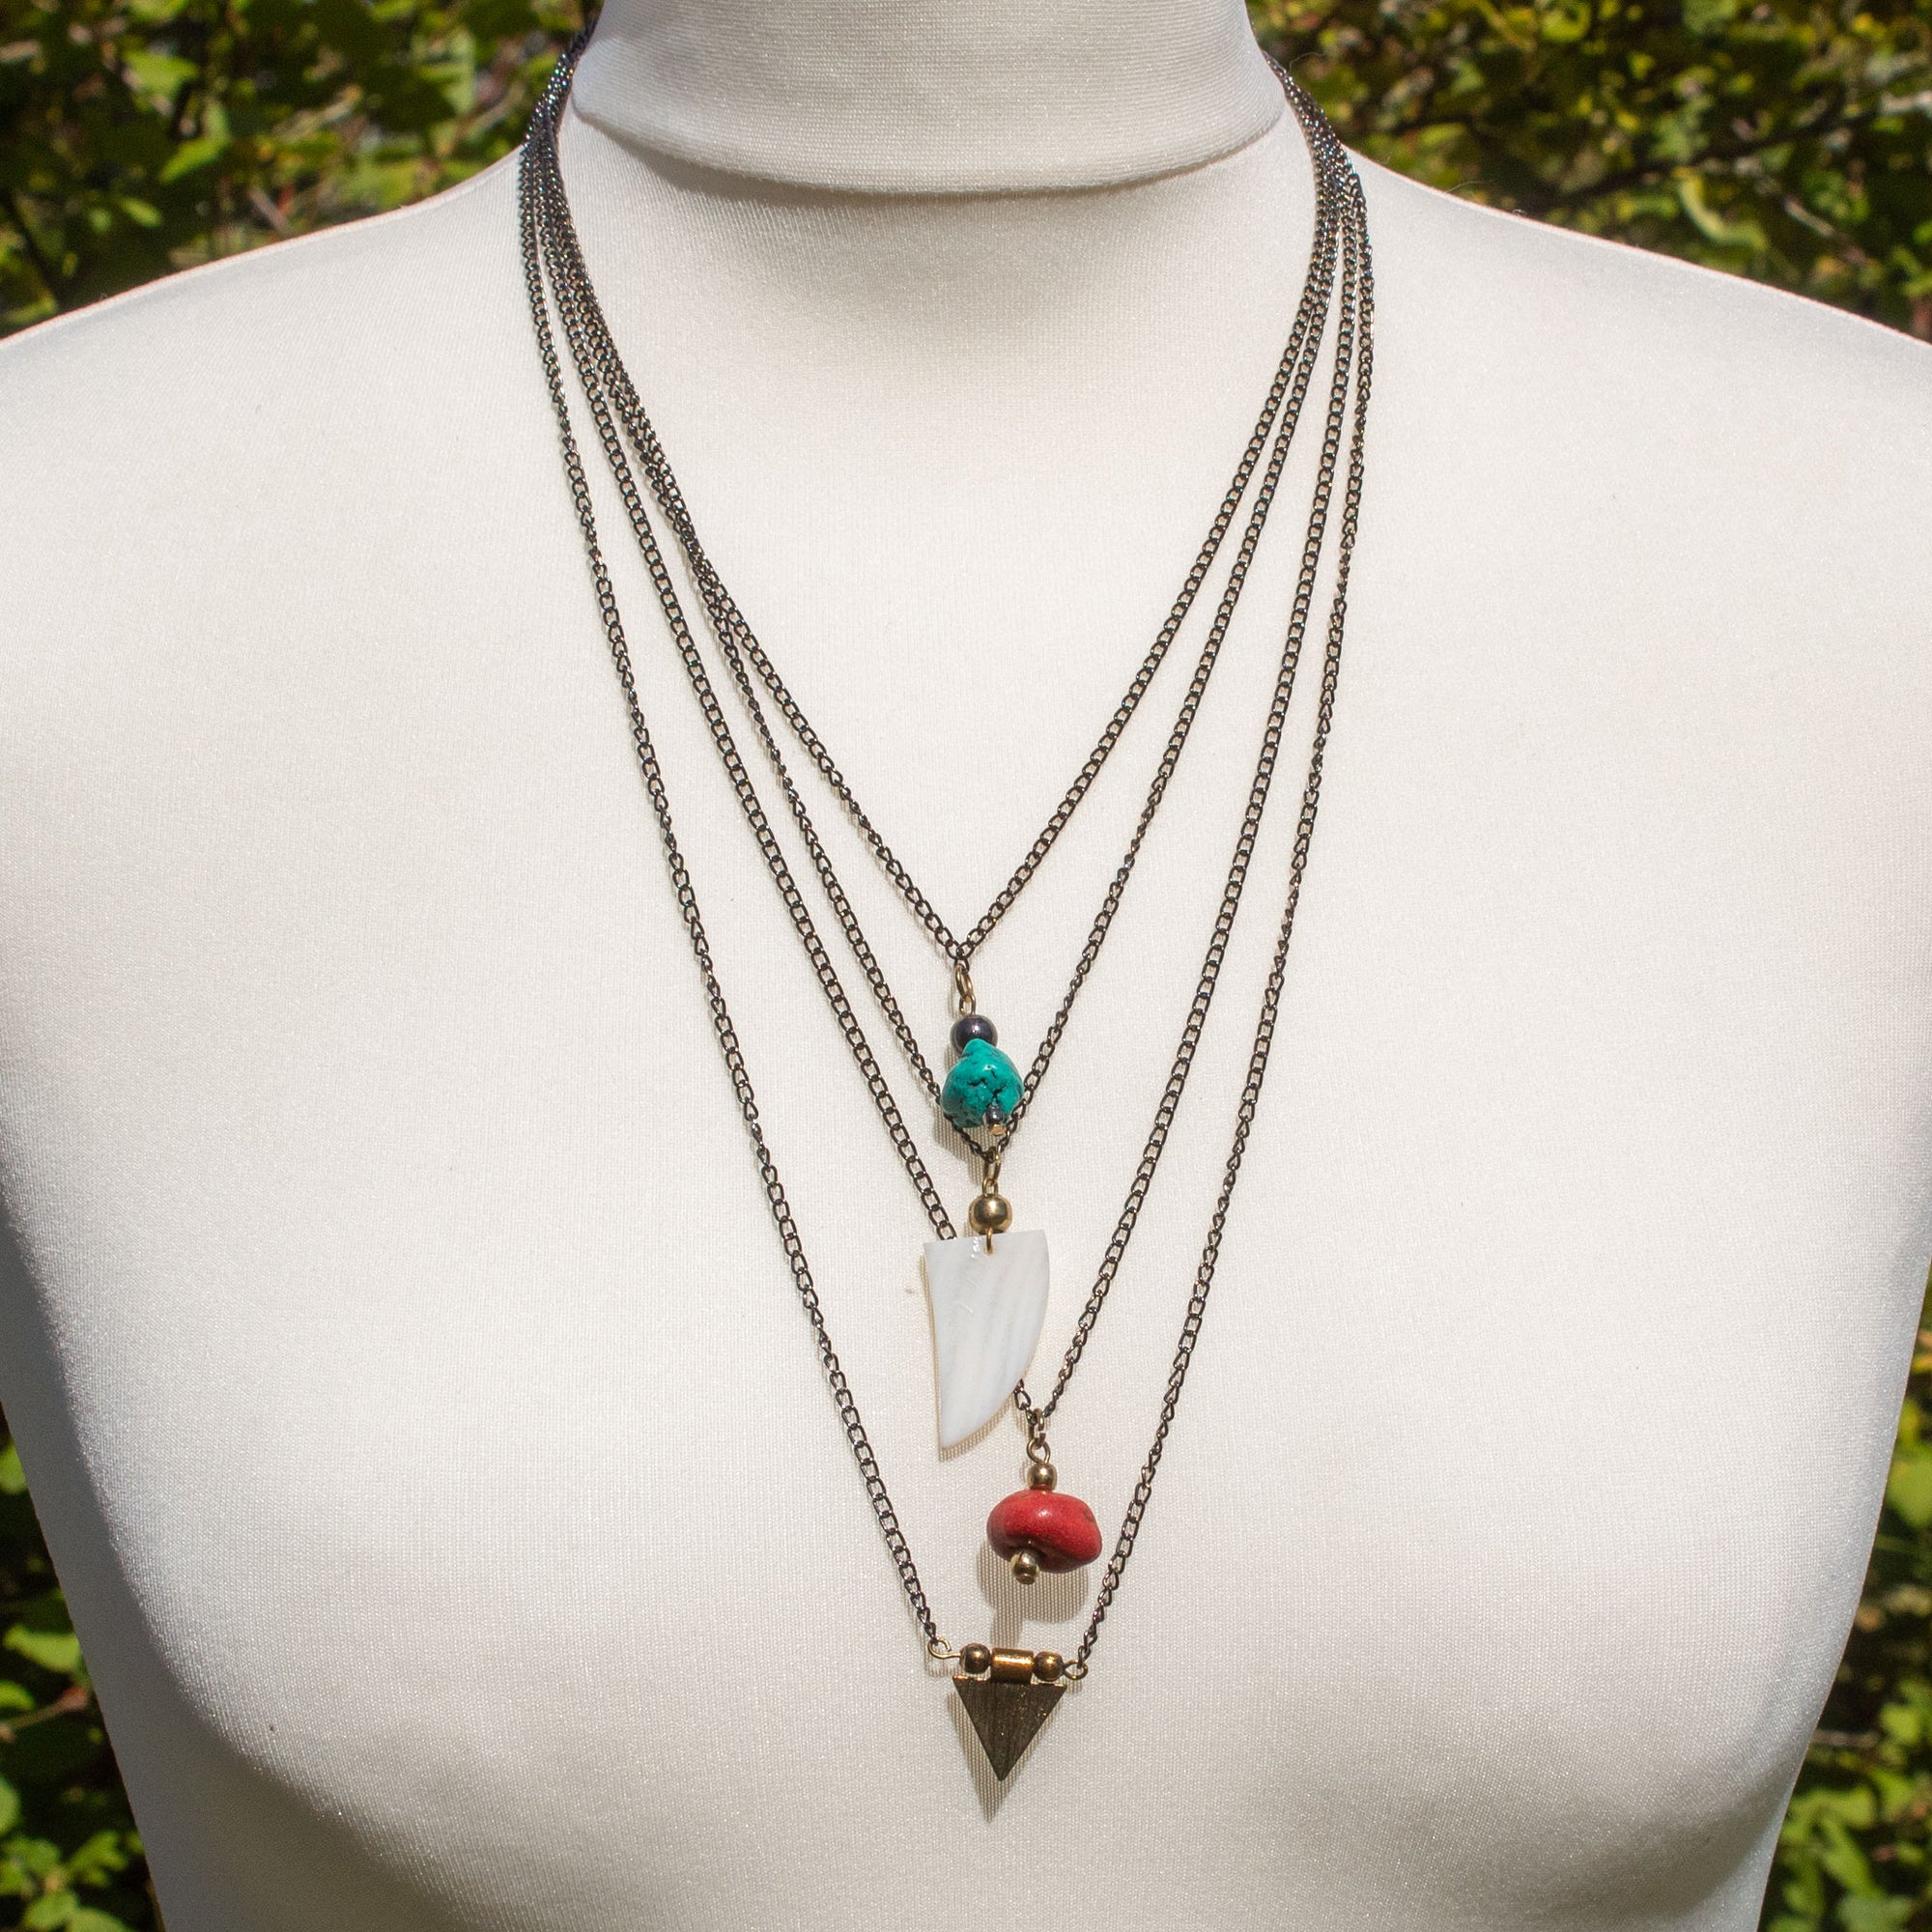 Multi Chain & Pendant Necklace | Necklace - The Naughty Shrew